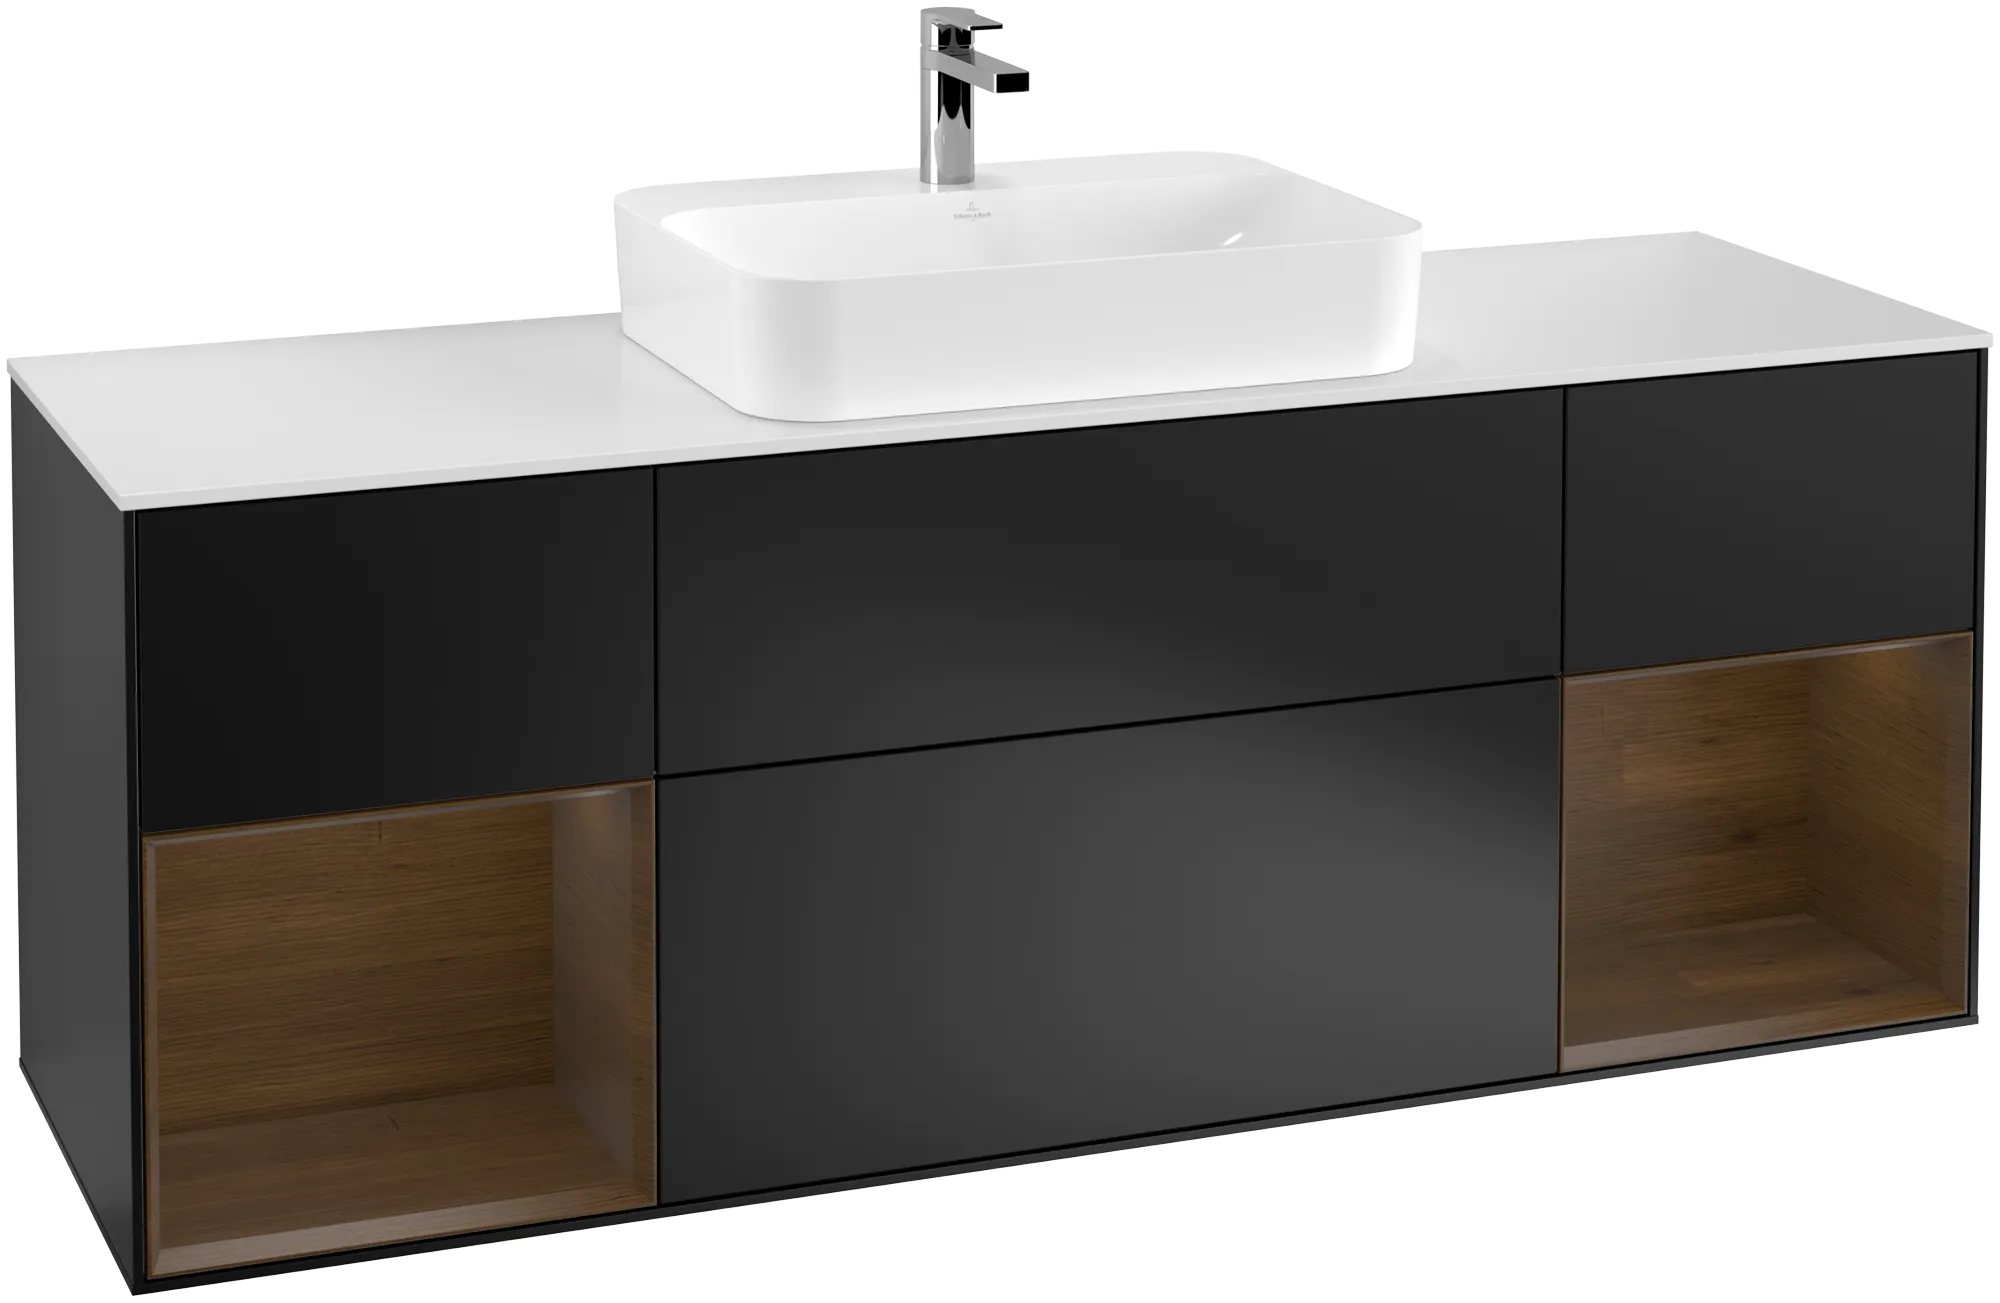 Picture of VILLEROY BOCH Finion Vanity unit, with lighting, 4 pull-out compartments, 1600 x 603 x 501 mm, Black Matt Lacquer / Walnut Veneer / Glass White Matt #G451GNPD